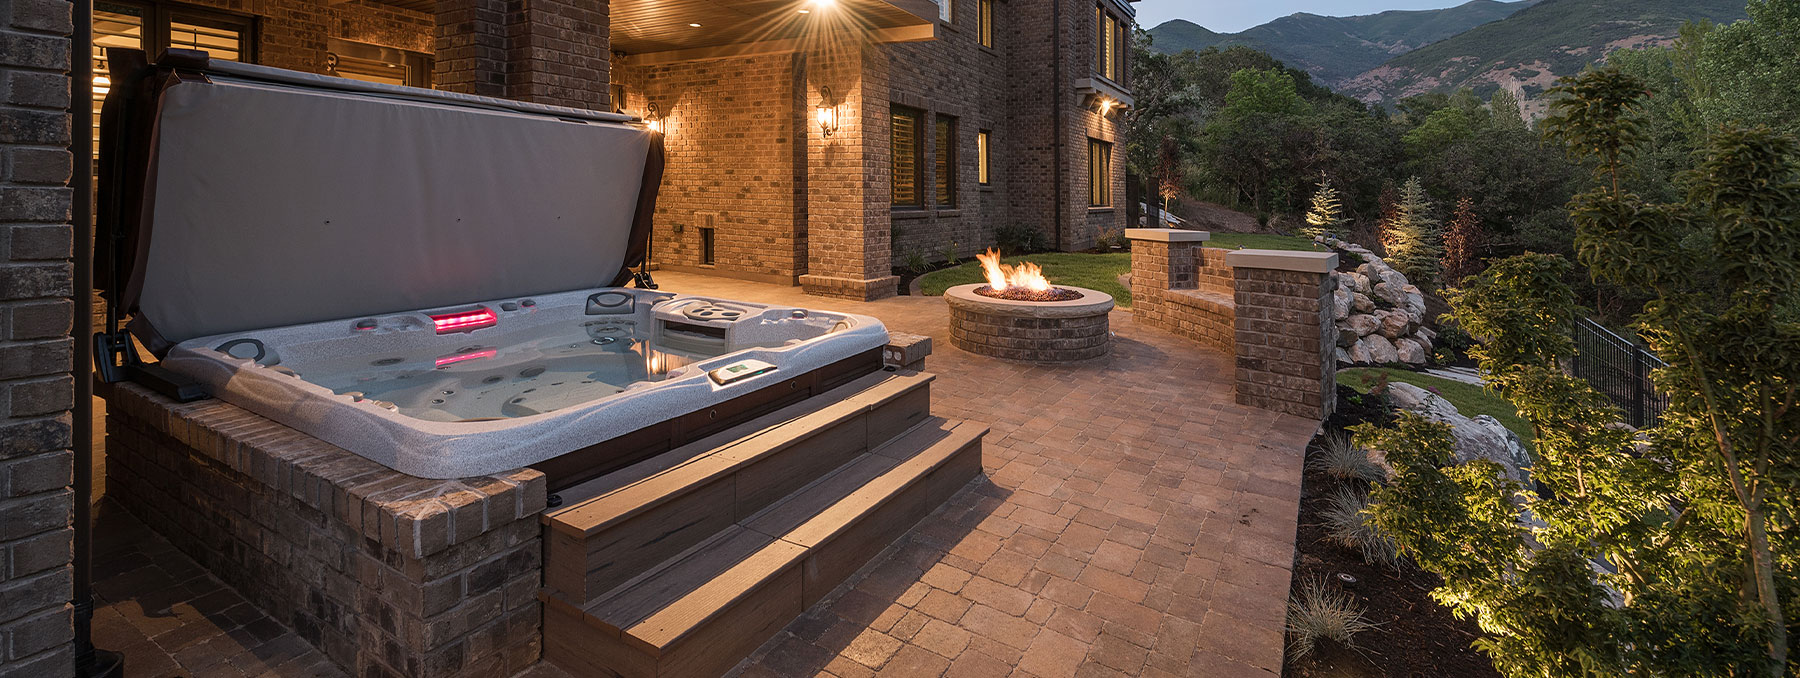 What’s the difference between a hot tub with a lounger and a hot tub without?